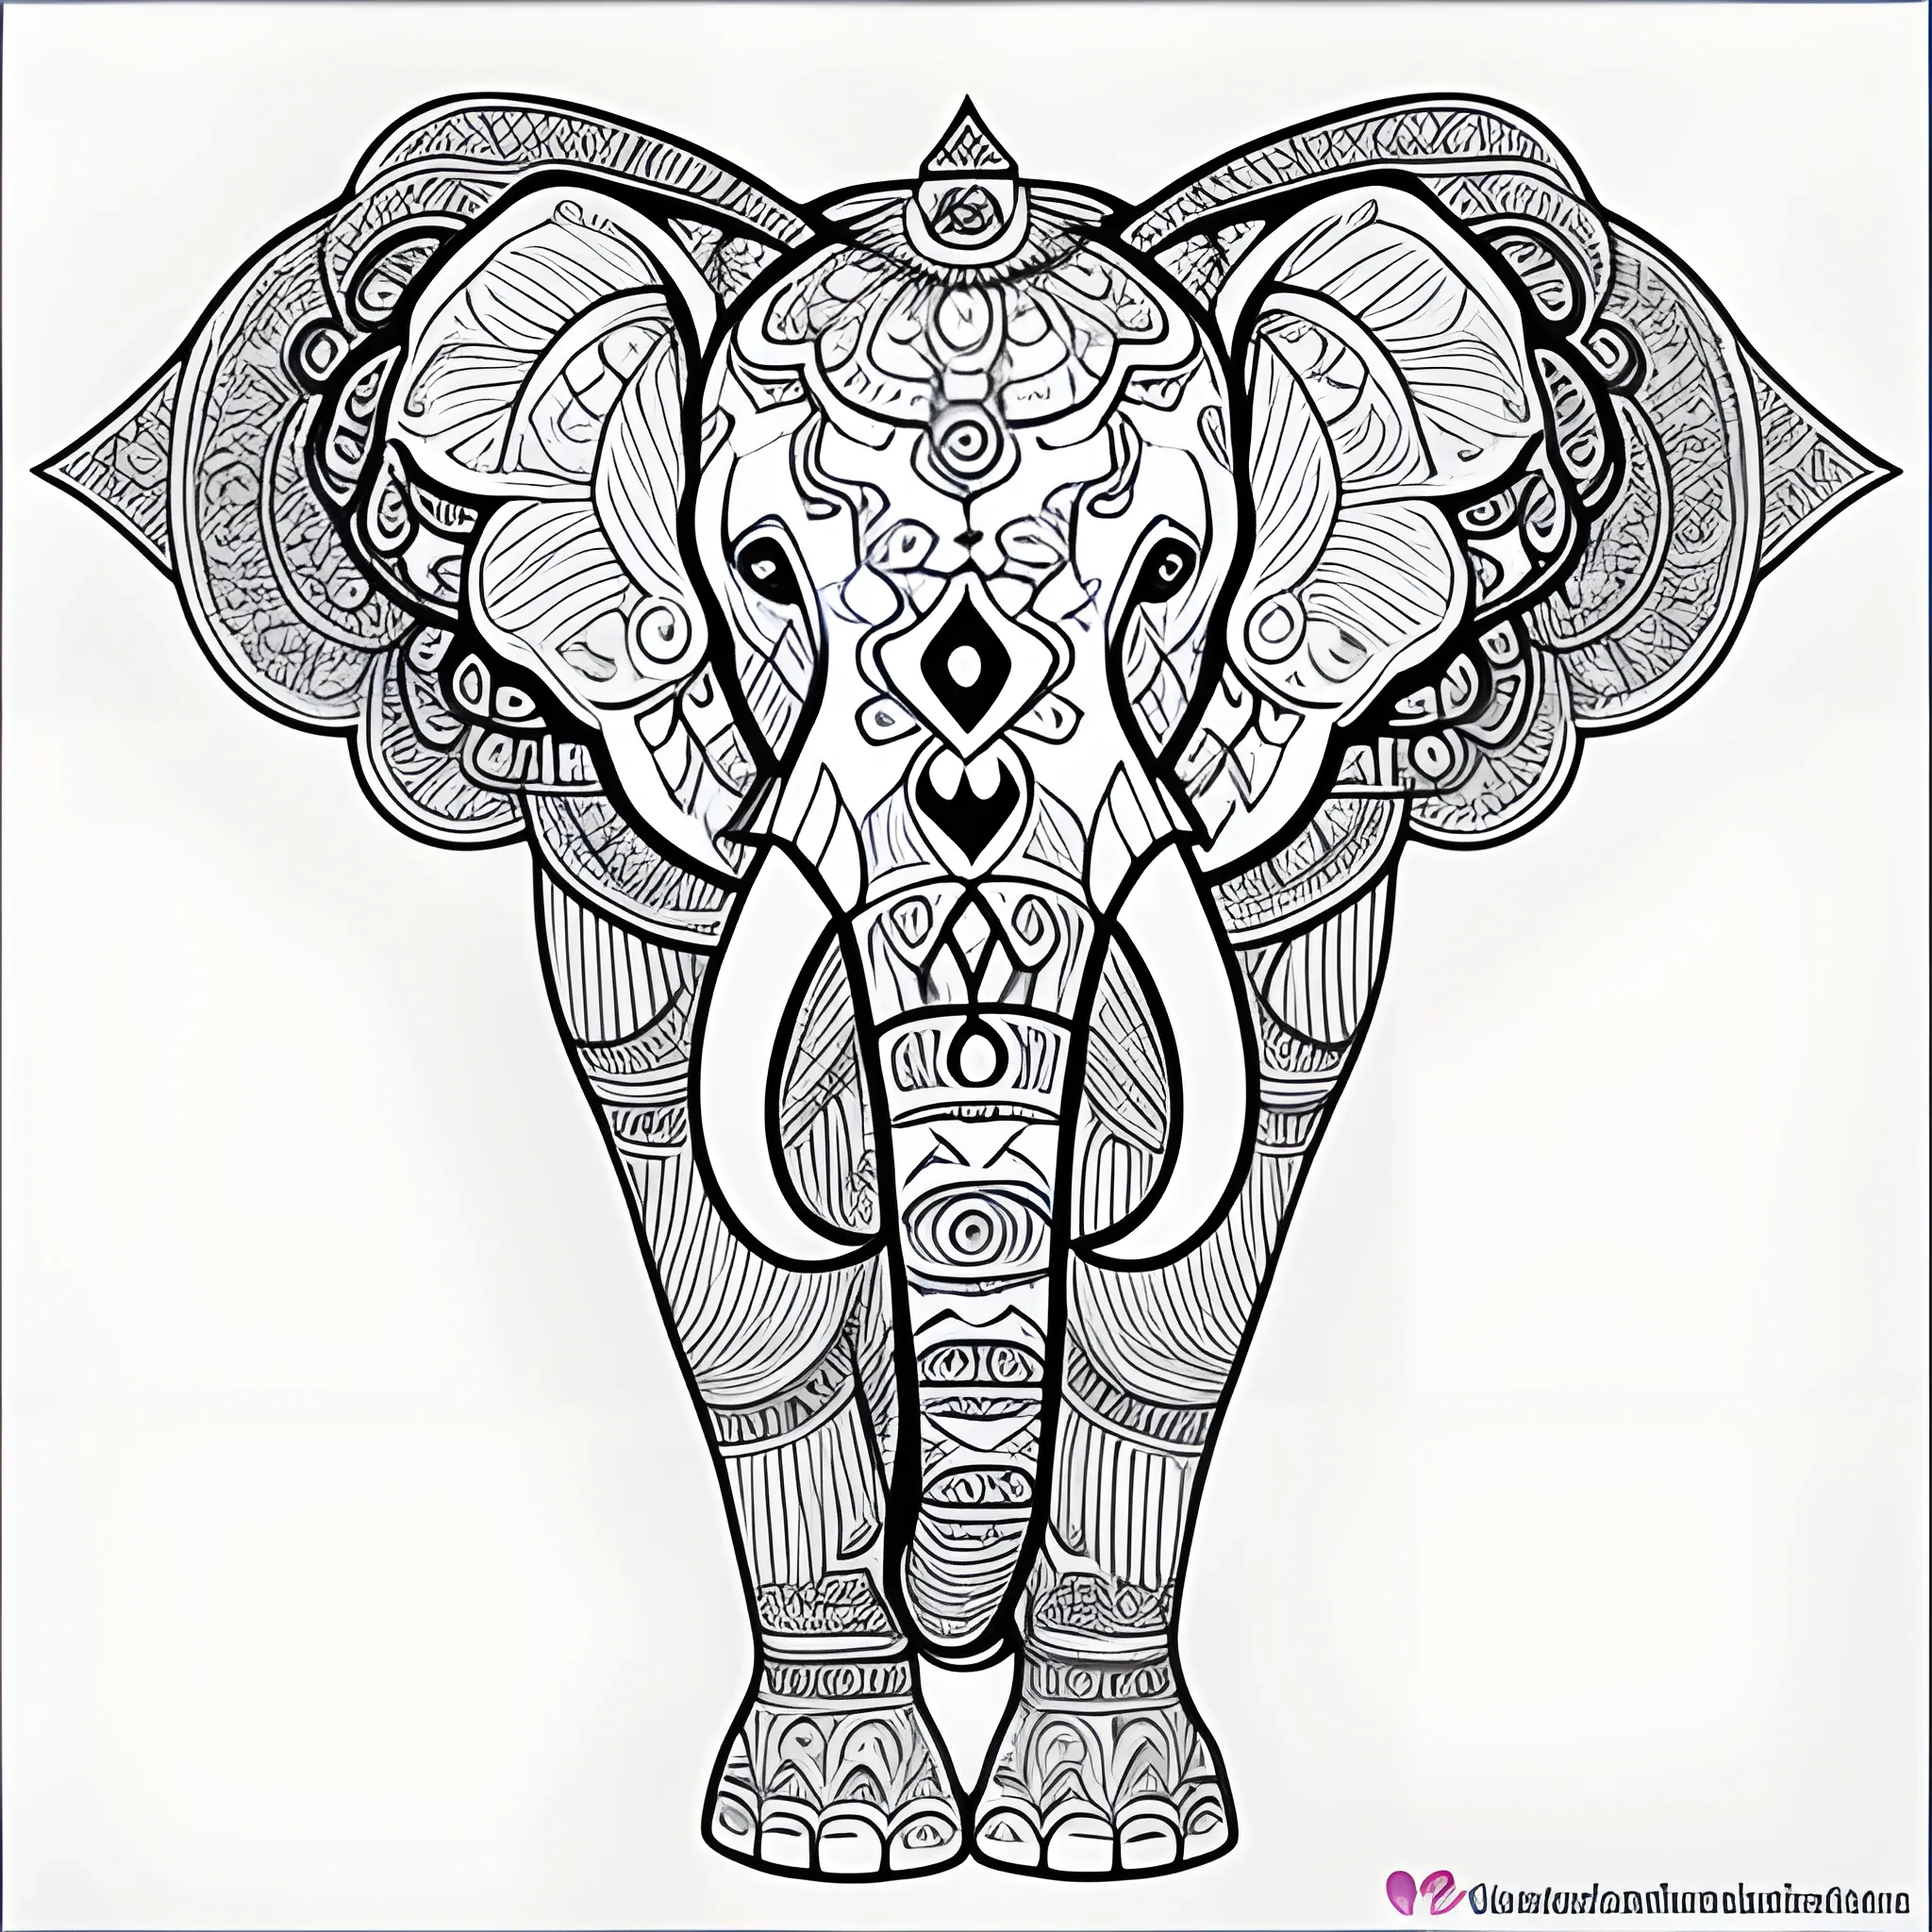 Coloring book page of a mandala elephant inspired in the indian culture